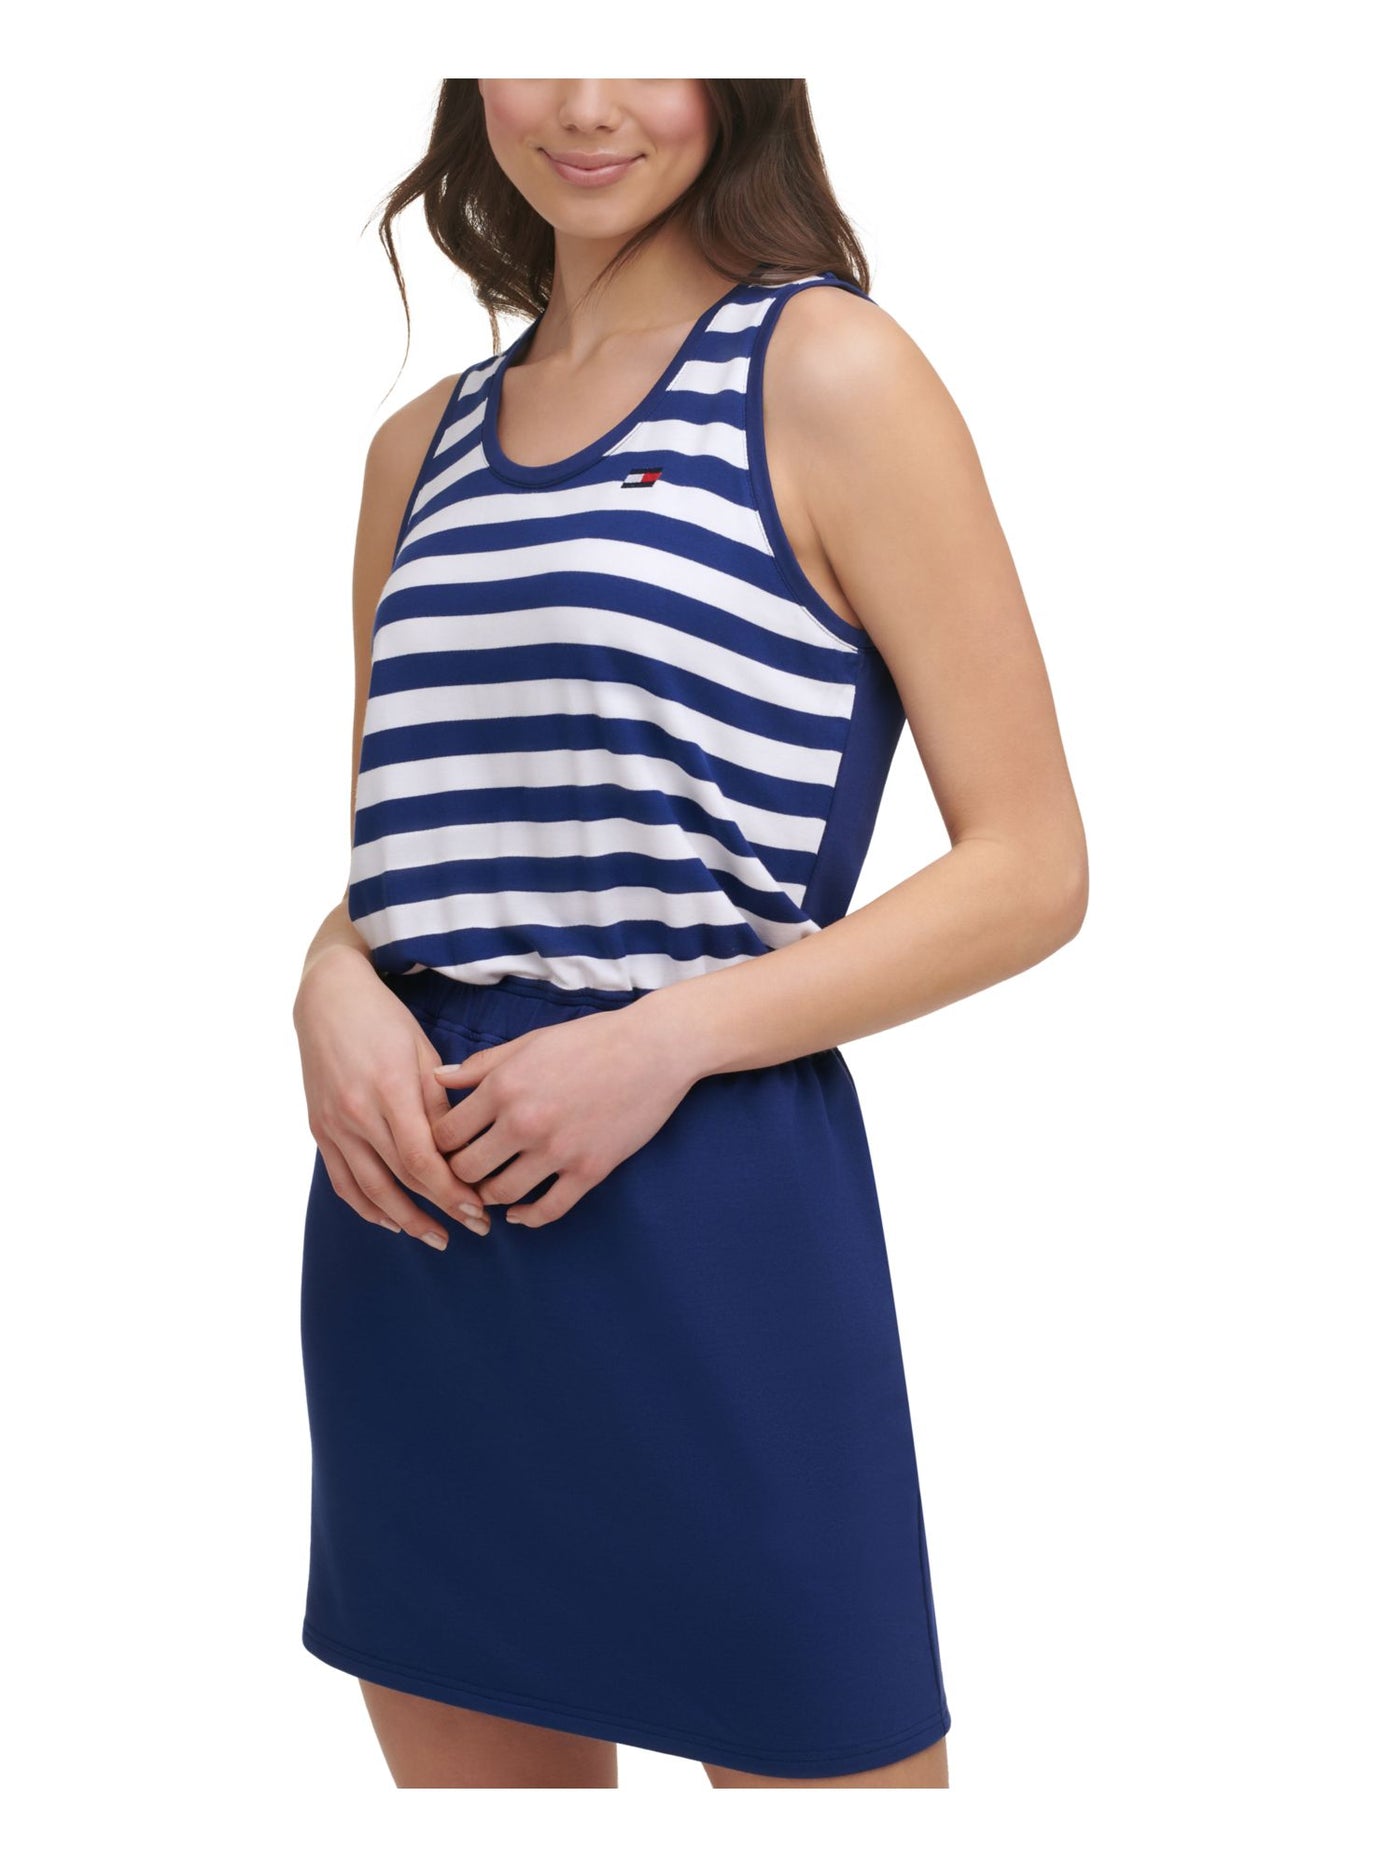 TOMMY HILFIGER SPORT Womens Blue Stretch Embroidered Terry Cinched-waist Striped Sleeveless Scoop Neck Short Sheath Dress L